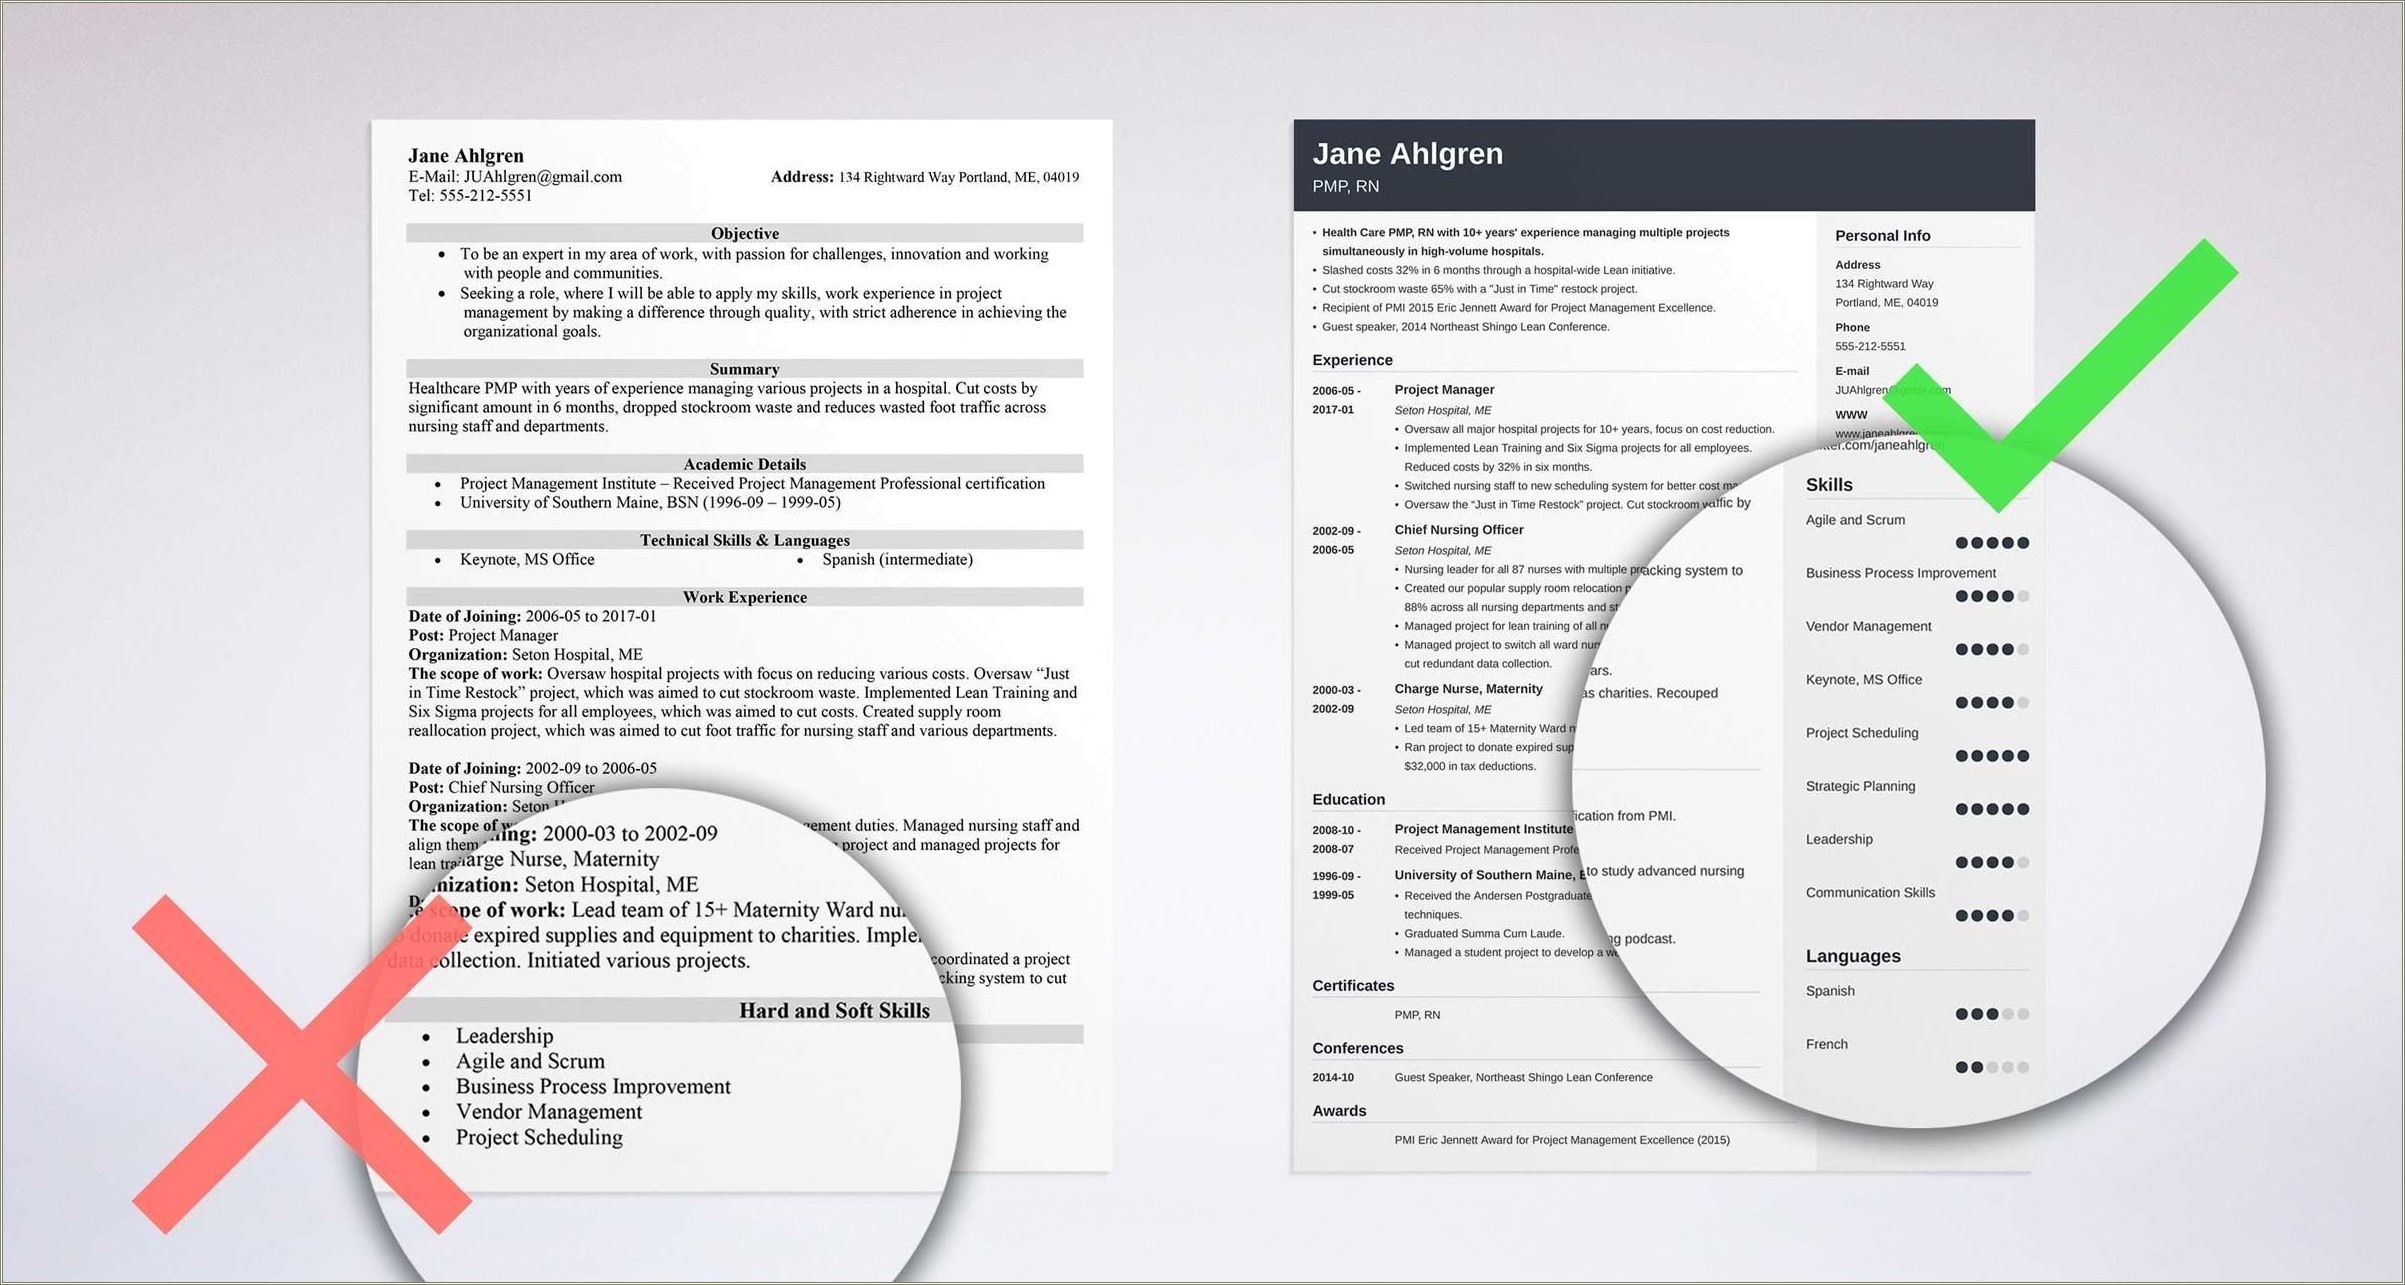 List Of Personal Skills In Resume